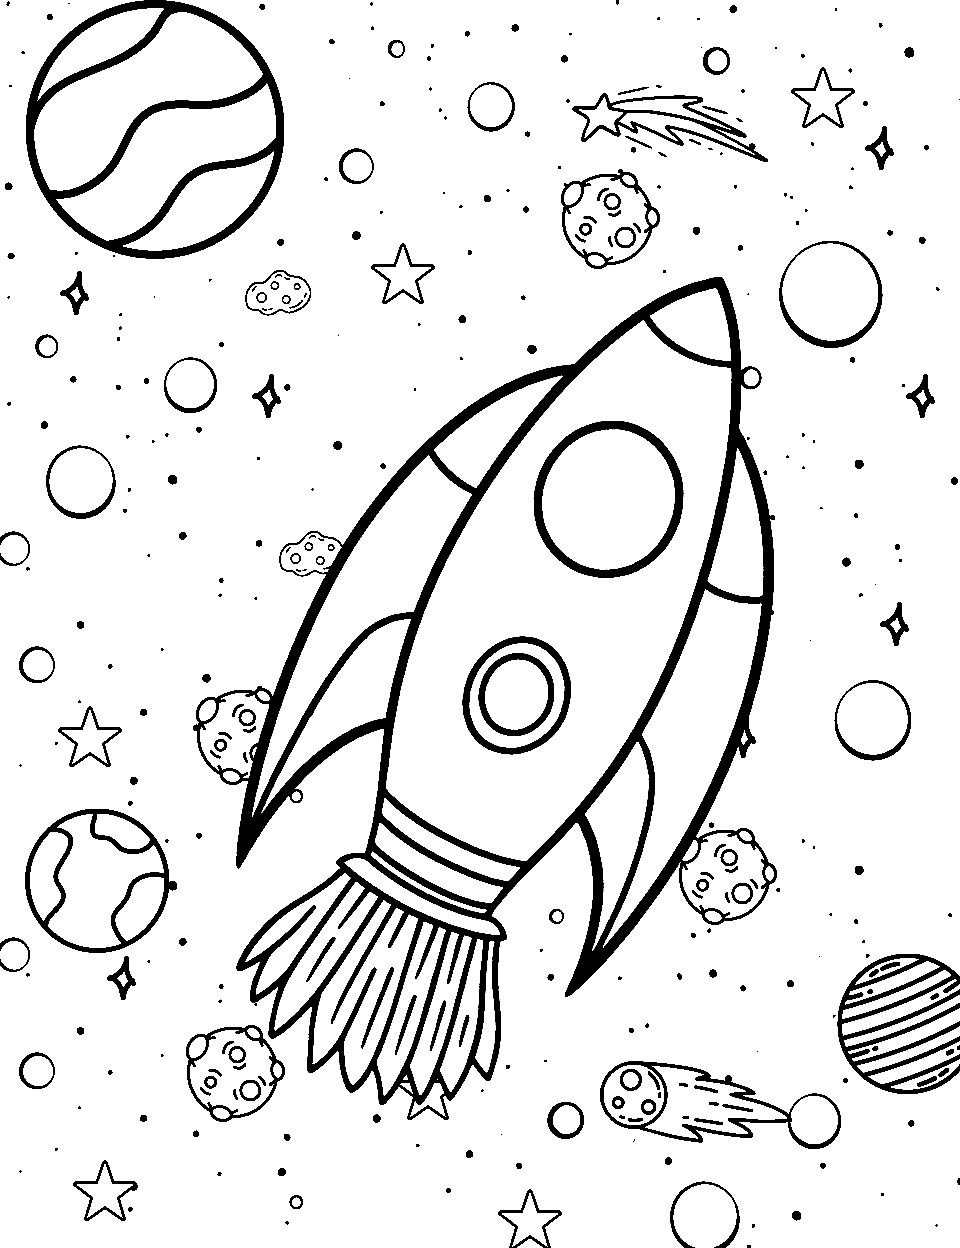 Interstellar Journey Coloring Page - A spaceship traveling between bright stars and nebulae in deep space.